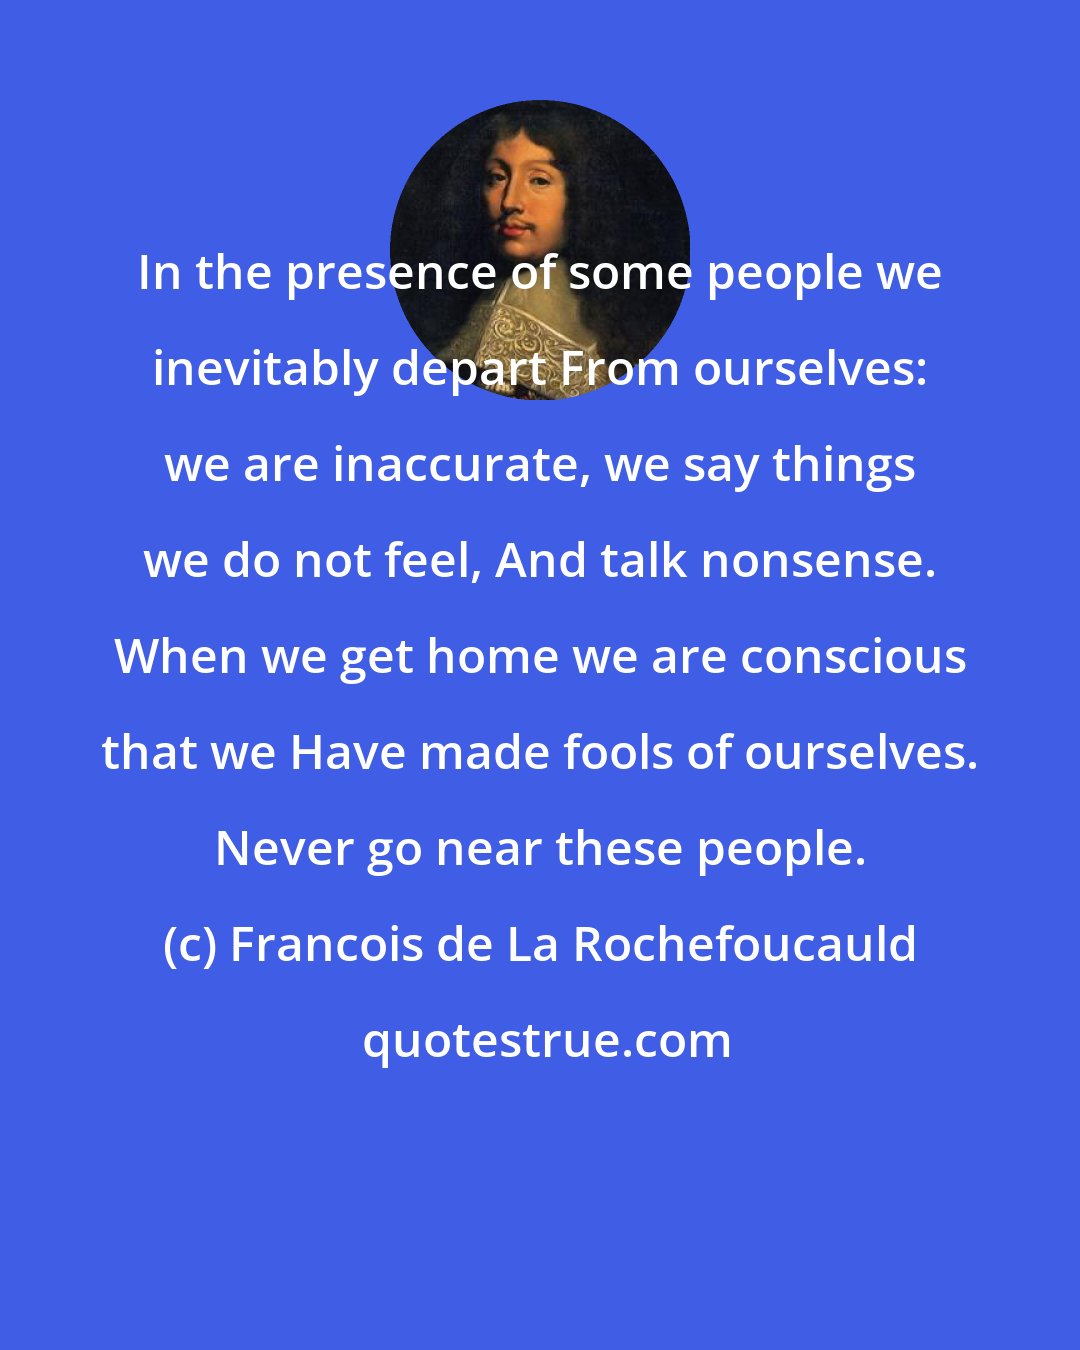 Francois de La Rochefoucauld: In the presence of some people we inevitably depart From ourselves: we are inaccurate, we say things we do not feel, And talk nonsense. When we get home we are conscious that we Have made fools of ourselves. Never go near these people.